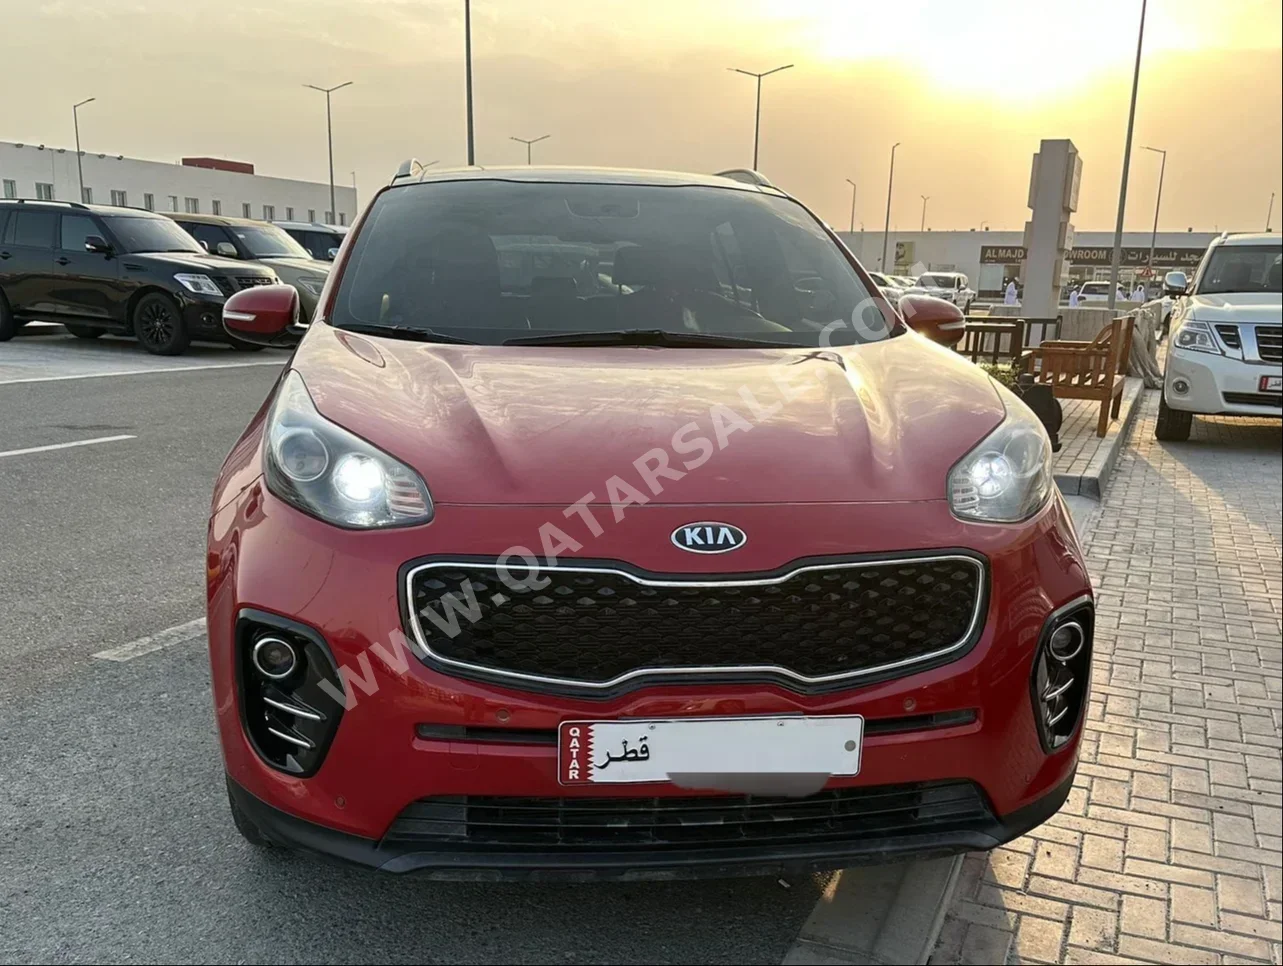 Kia  Sportage  2019  Automatic  135,000 Km  4 Cylinder  Front Wheel Drive (FWD)  SUV  Red